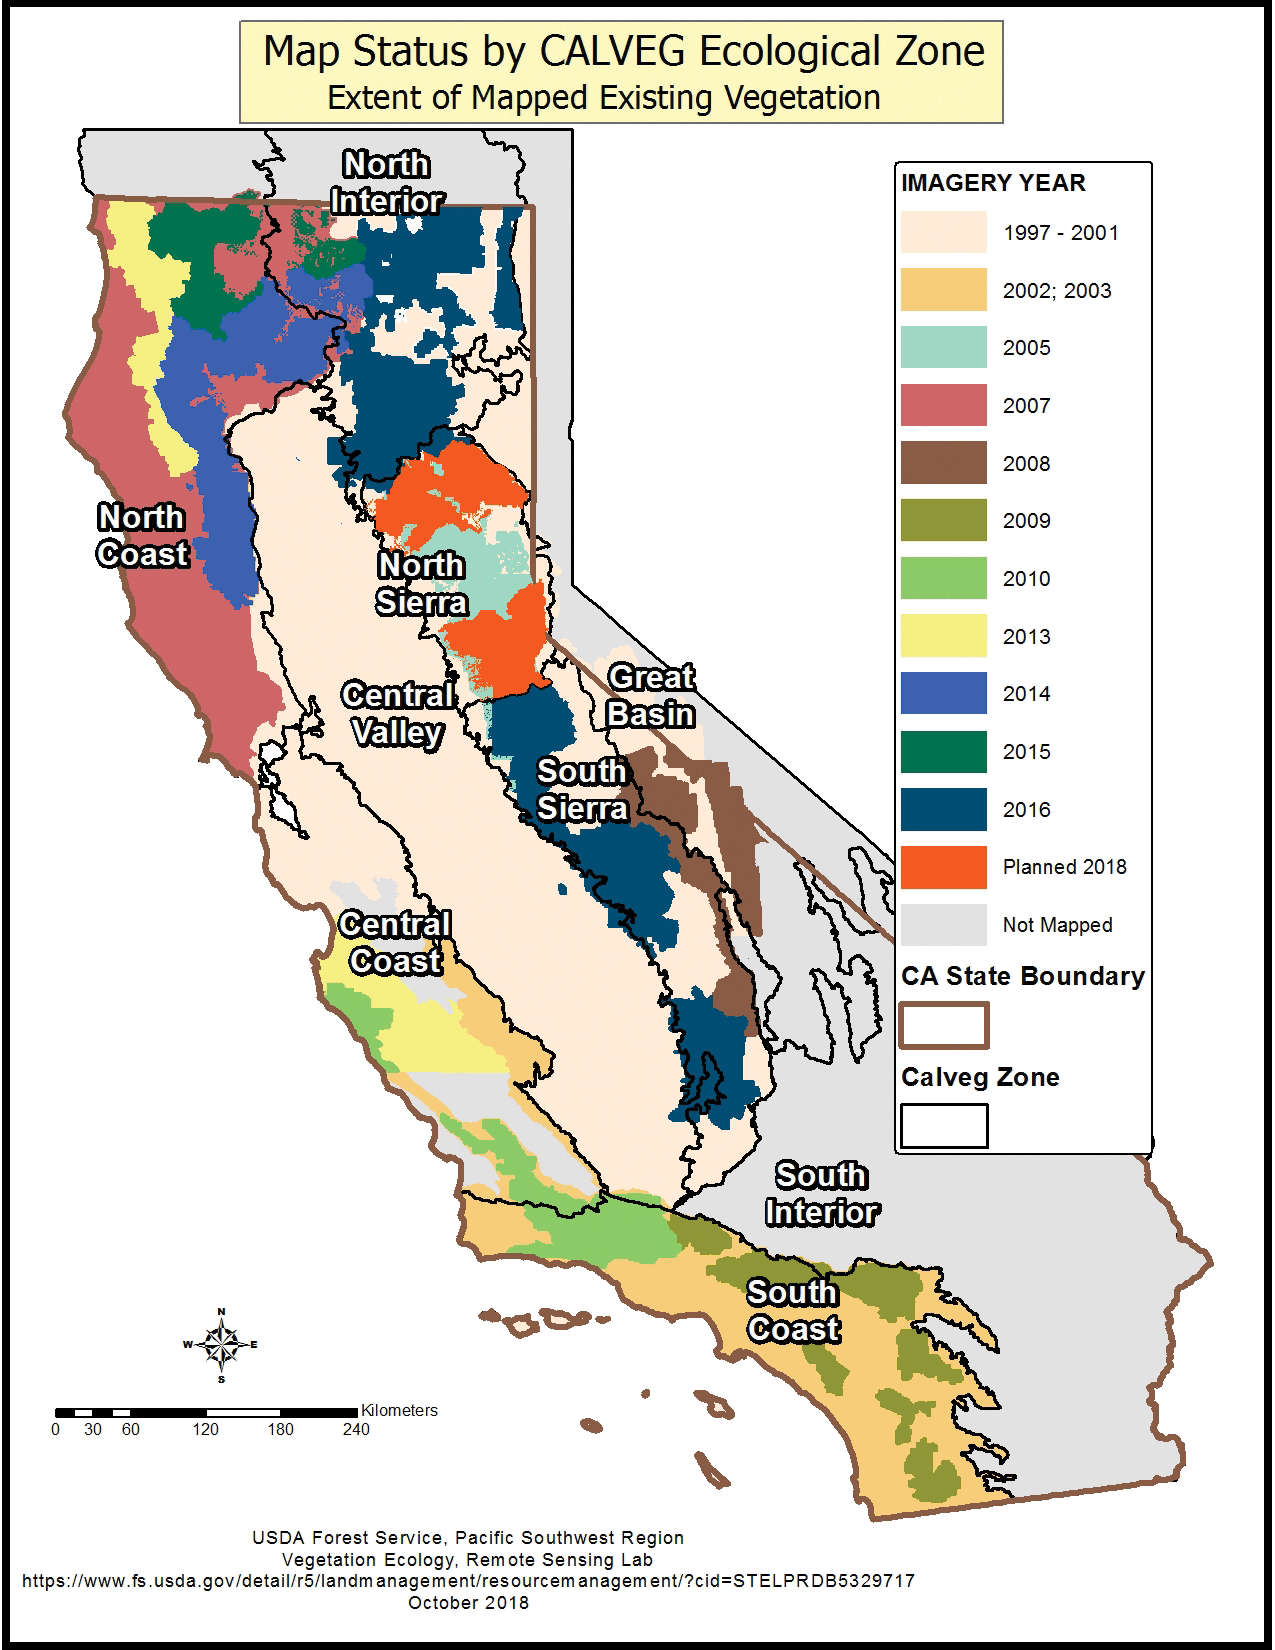 This picture shows the extent of vegetation mapping in California’s ecological mapping
                        zones. Vegetation mapping has been completed for all national forest lands in California,
                        and this map indicates where and when mapping has been completed for all land ownerships
                        within the zones. Image credit: USDA Forest Service; used with permission.